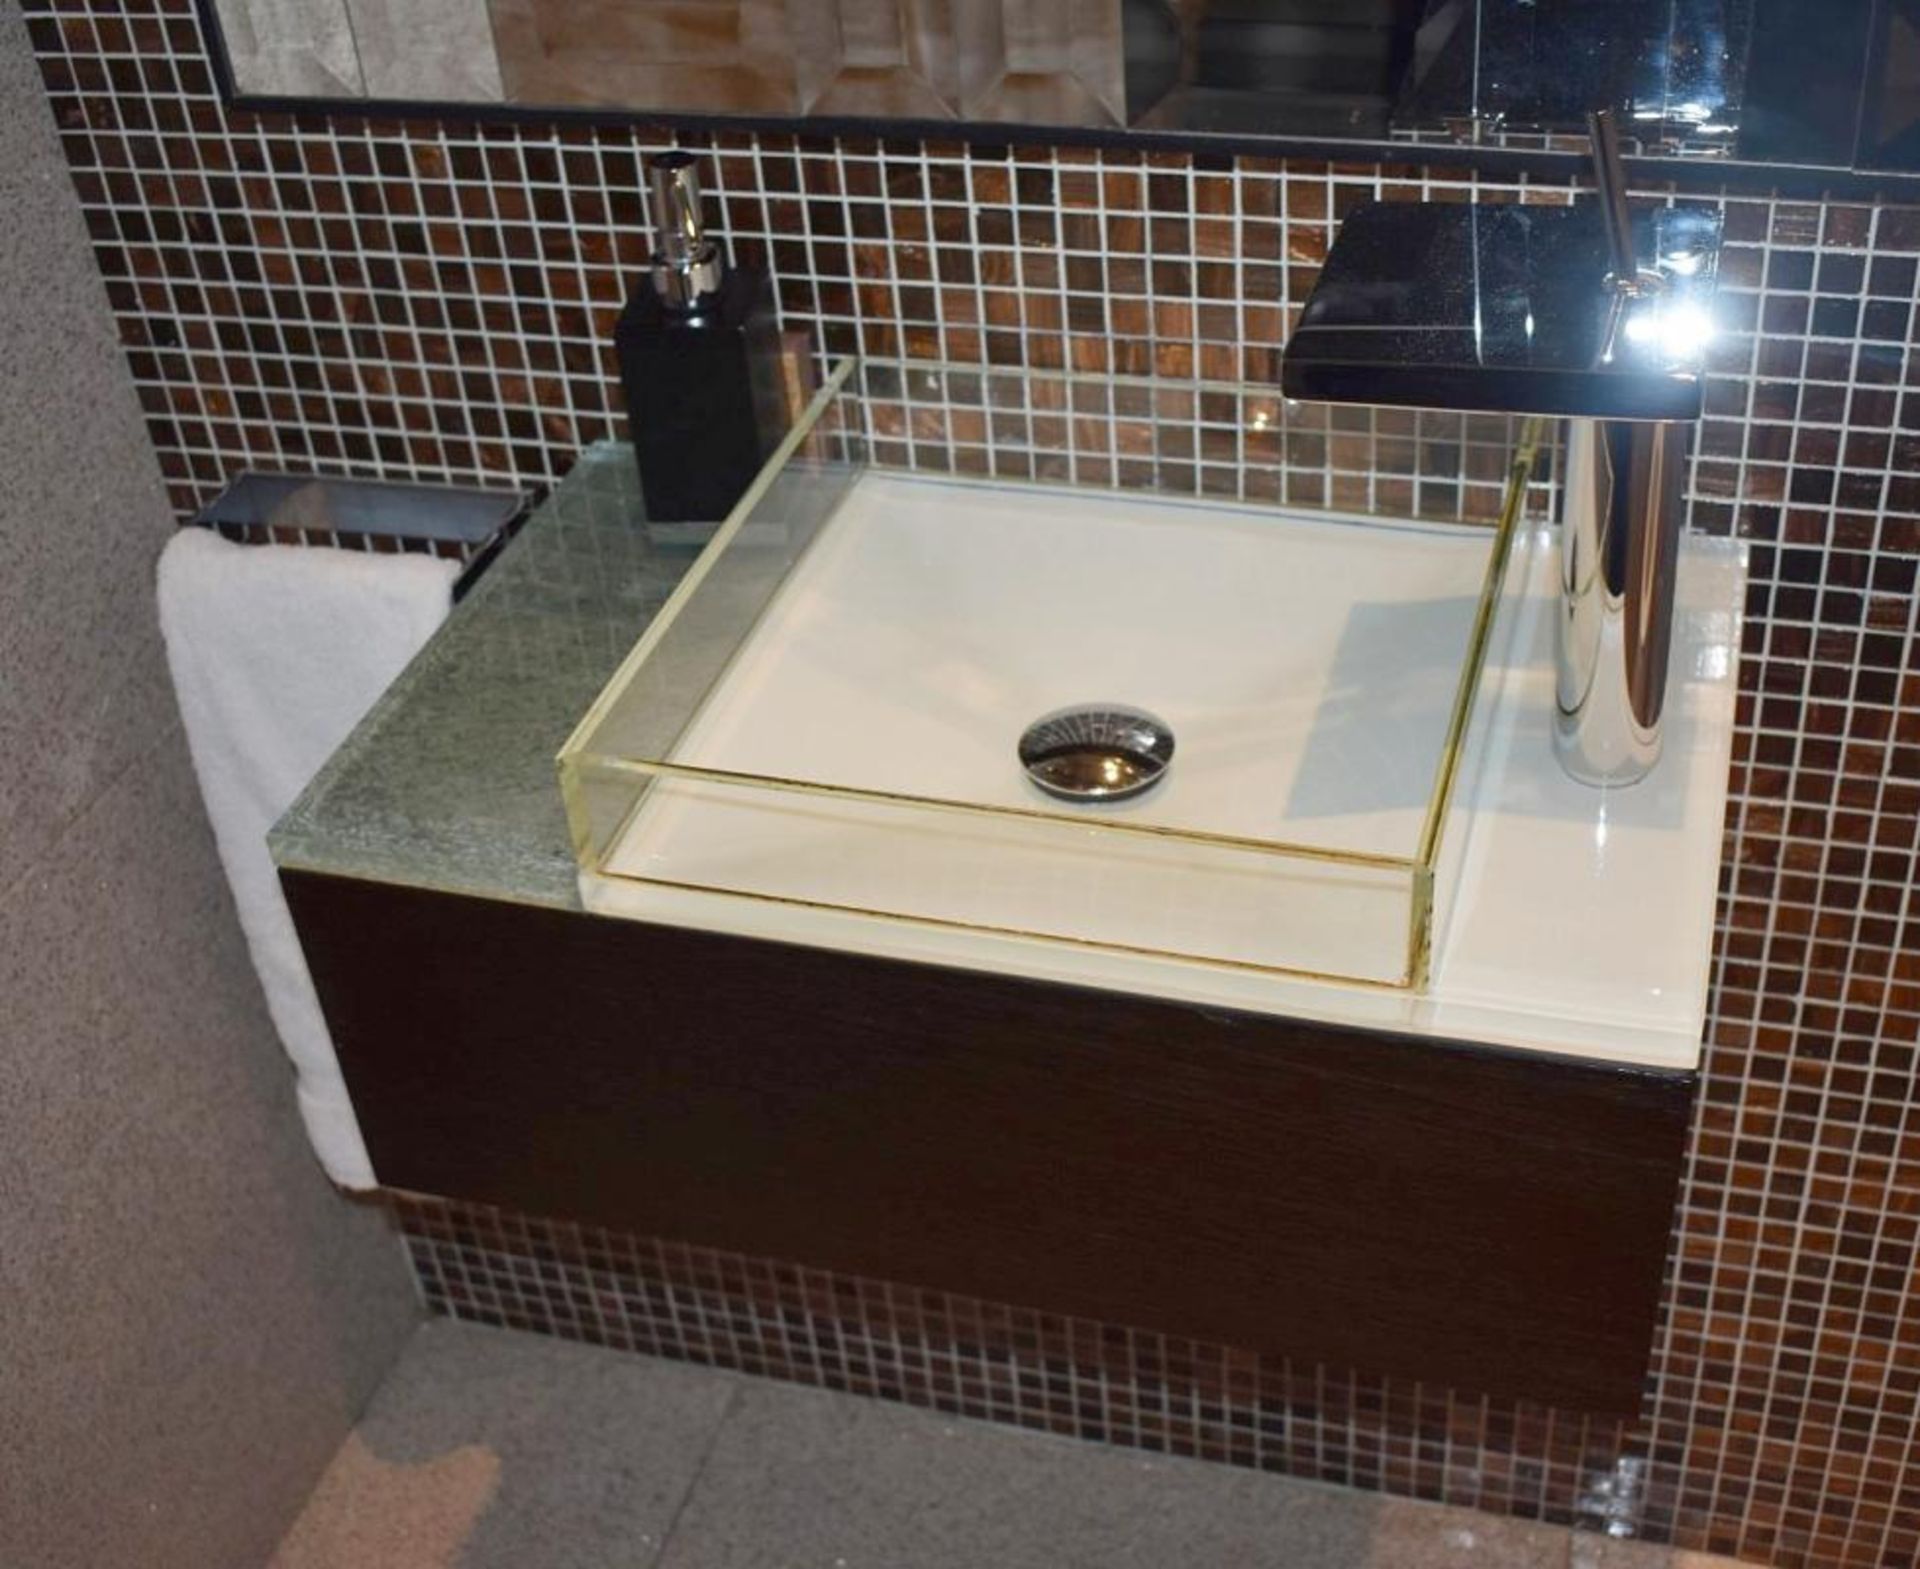 1 x Downstairs Bathroom Suite - Includes: Wall Hung Pan with Seat, Gerberit Wall Flusher, Wall Hung - Image 3 of 10